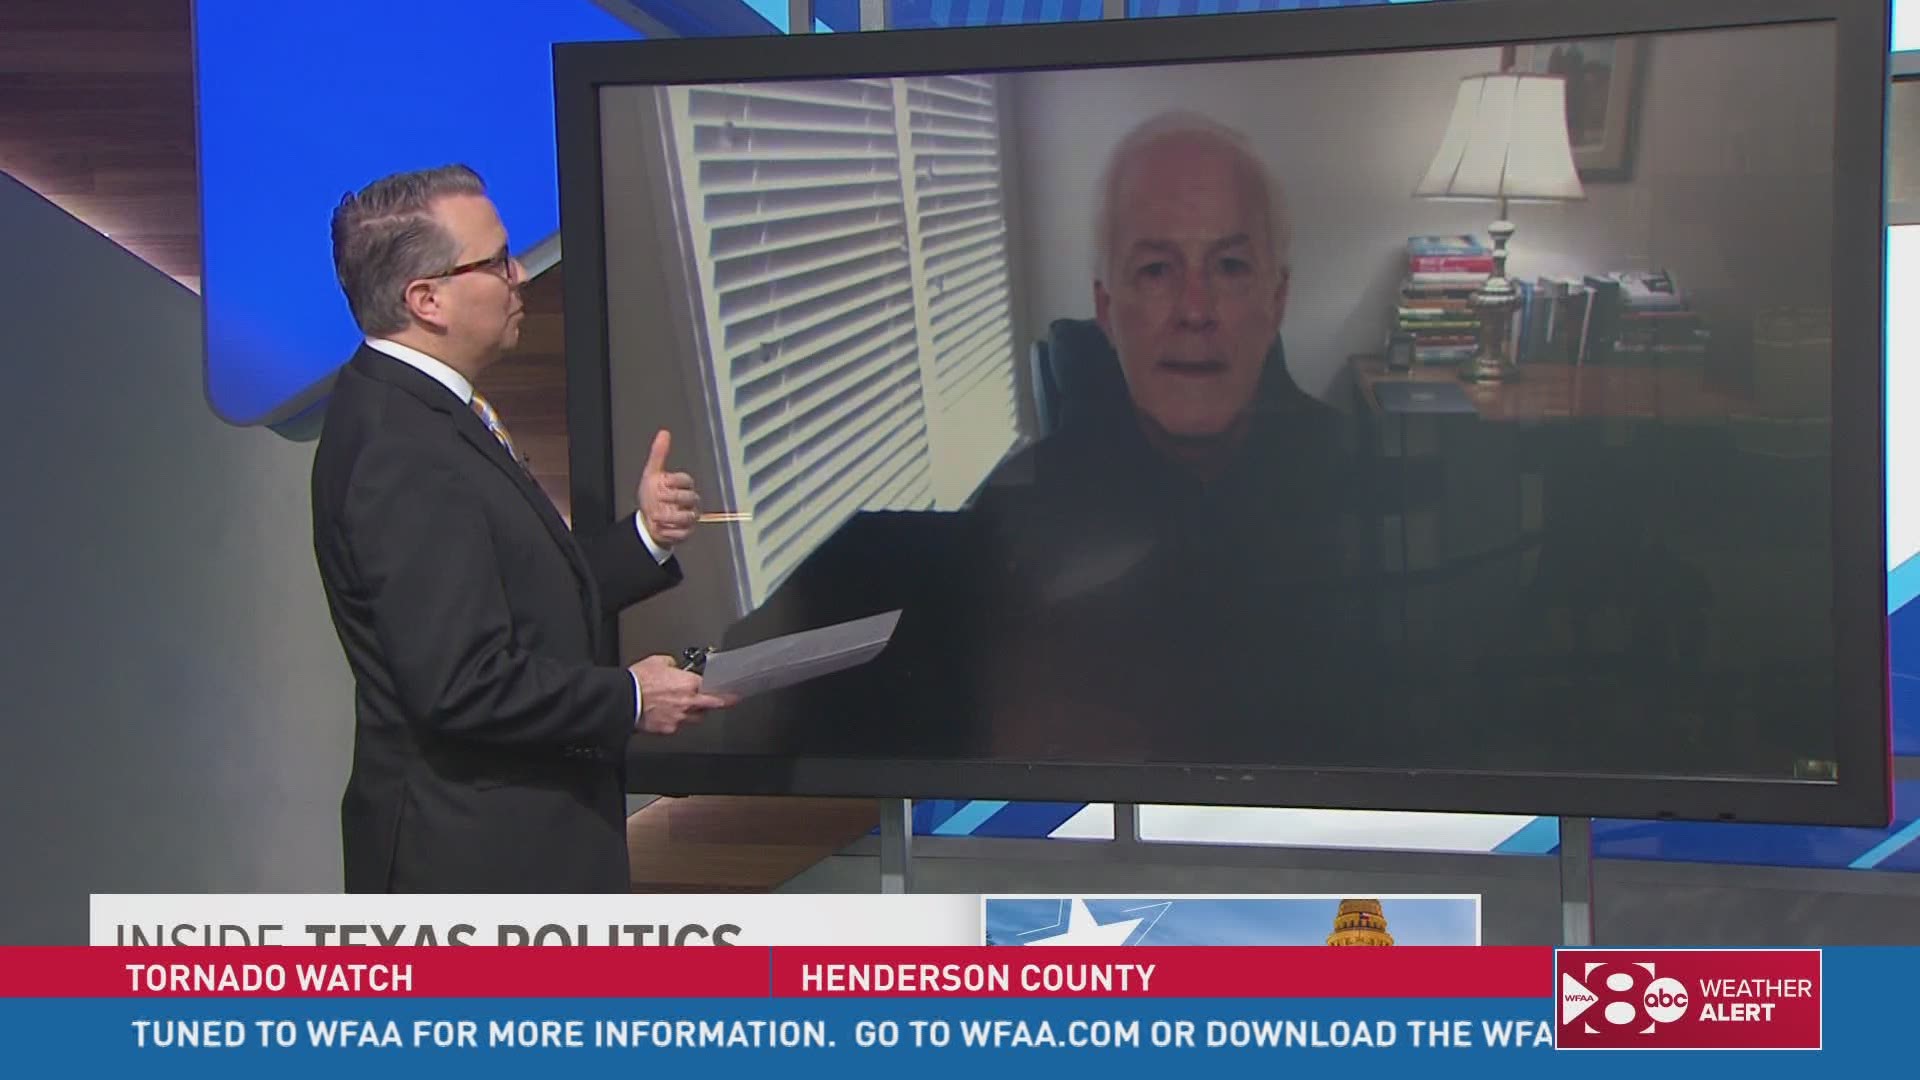 U.S. Senator John Cornyn joined Jason Whitely to discuss coronavirus testing in Texas and when it is expected to improve.